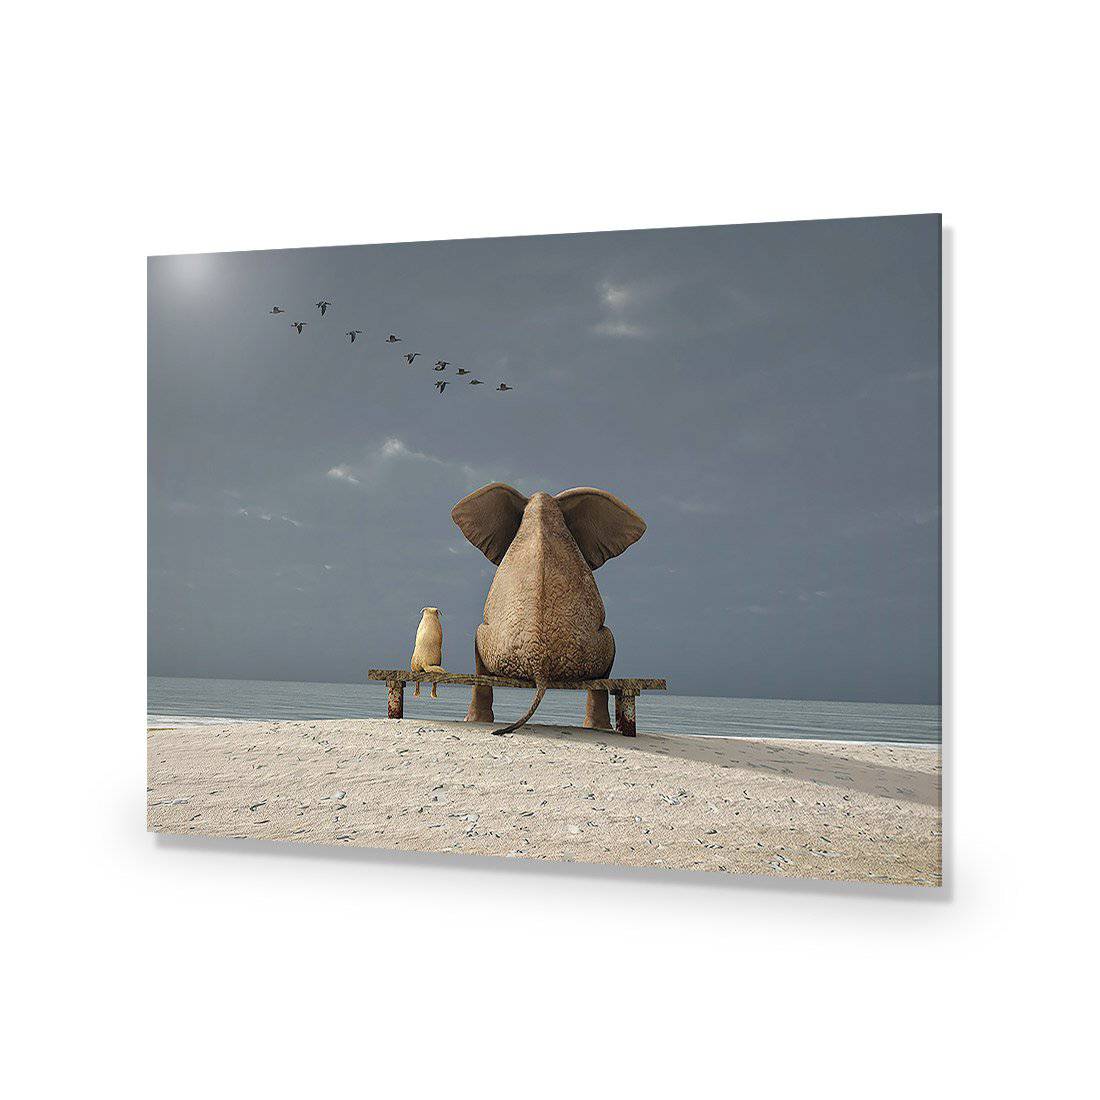 Little And Large-Acrylic-Wall Art Design-Without Border-Acrylic - No Frame-45x30cm-Wall Art Designs